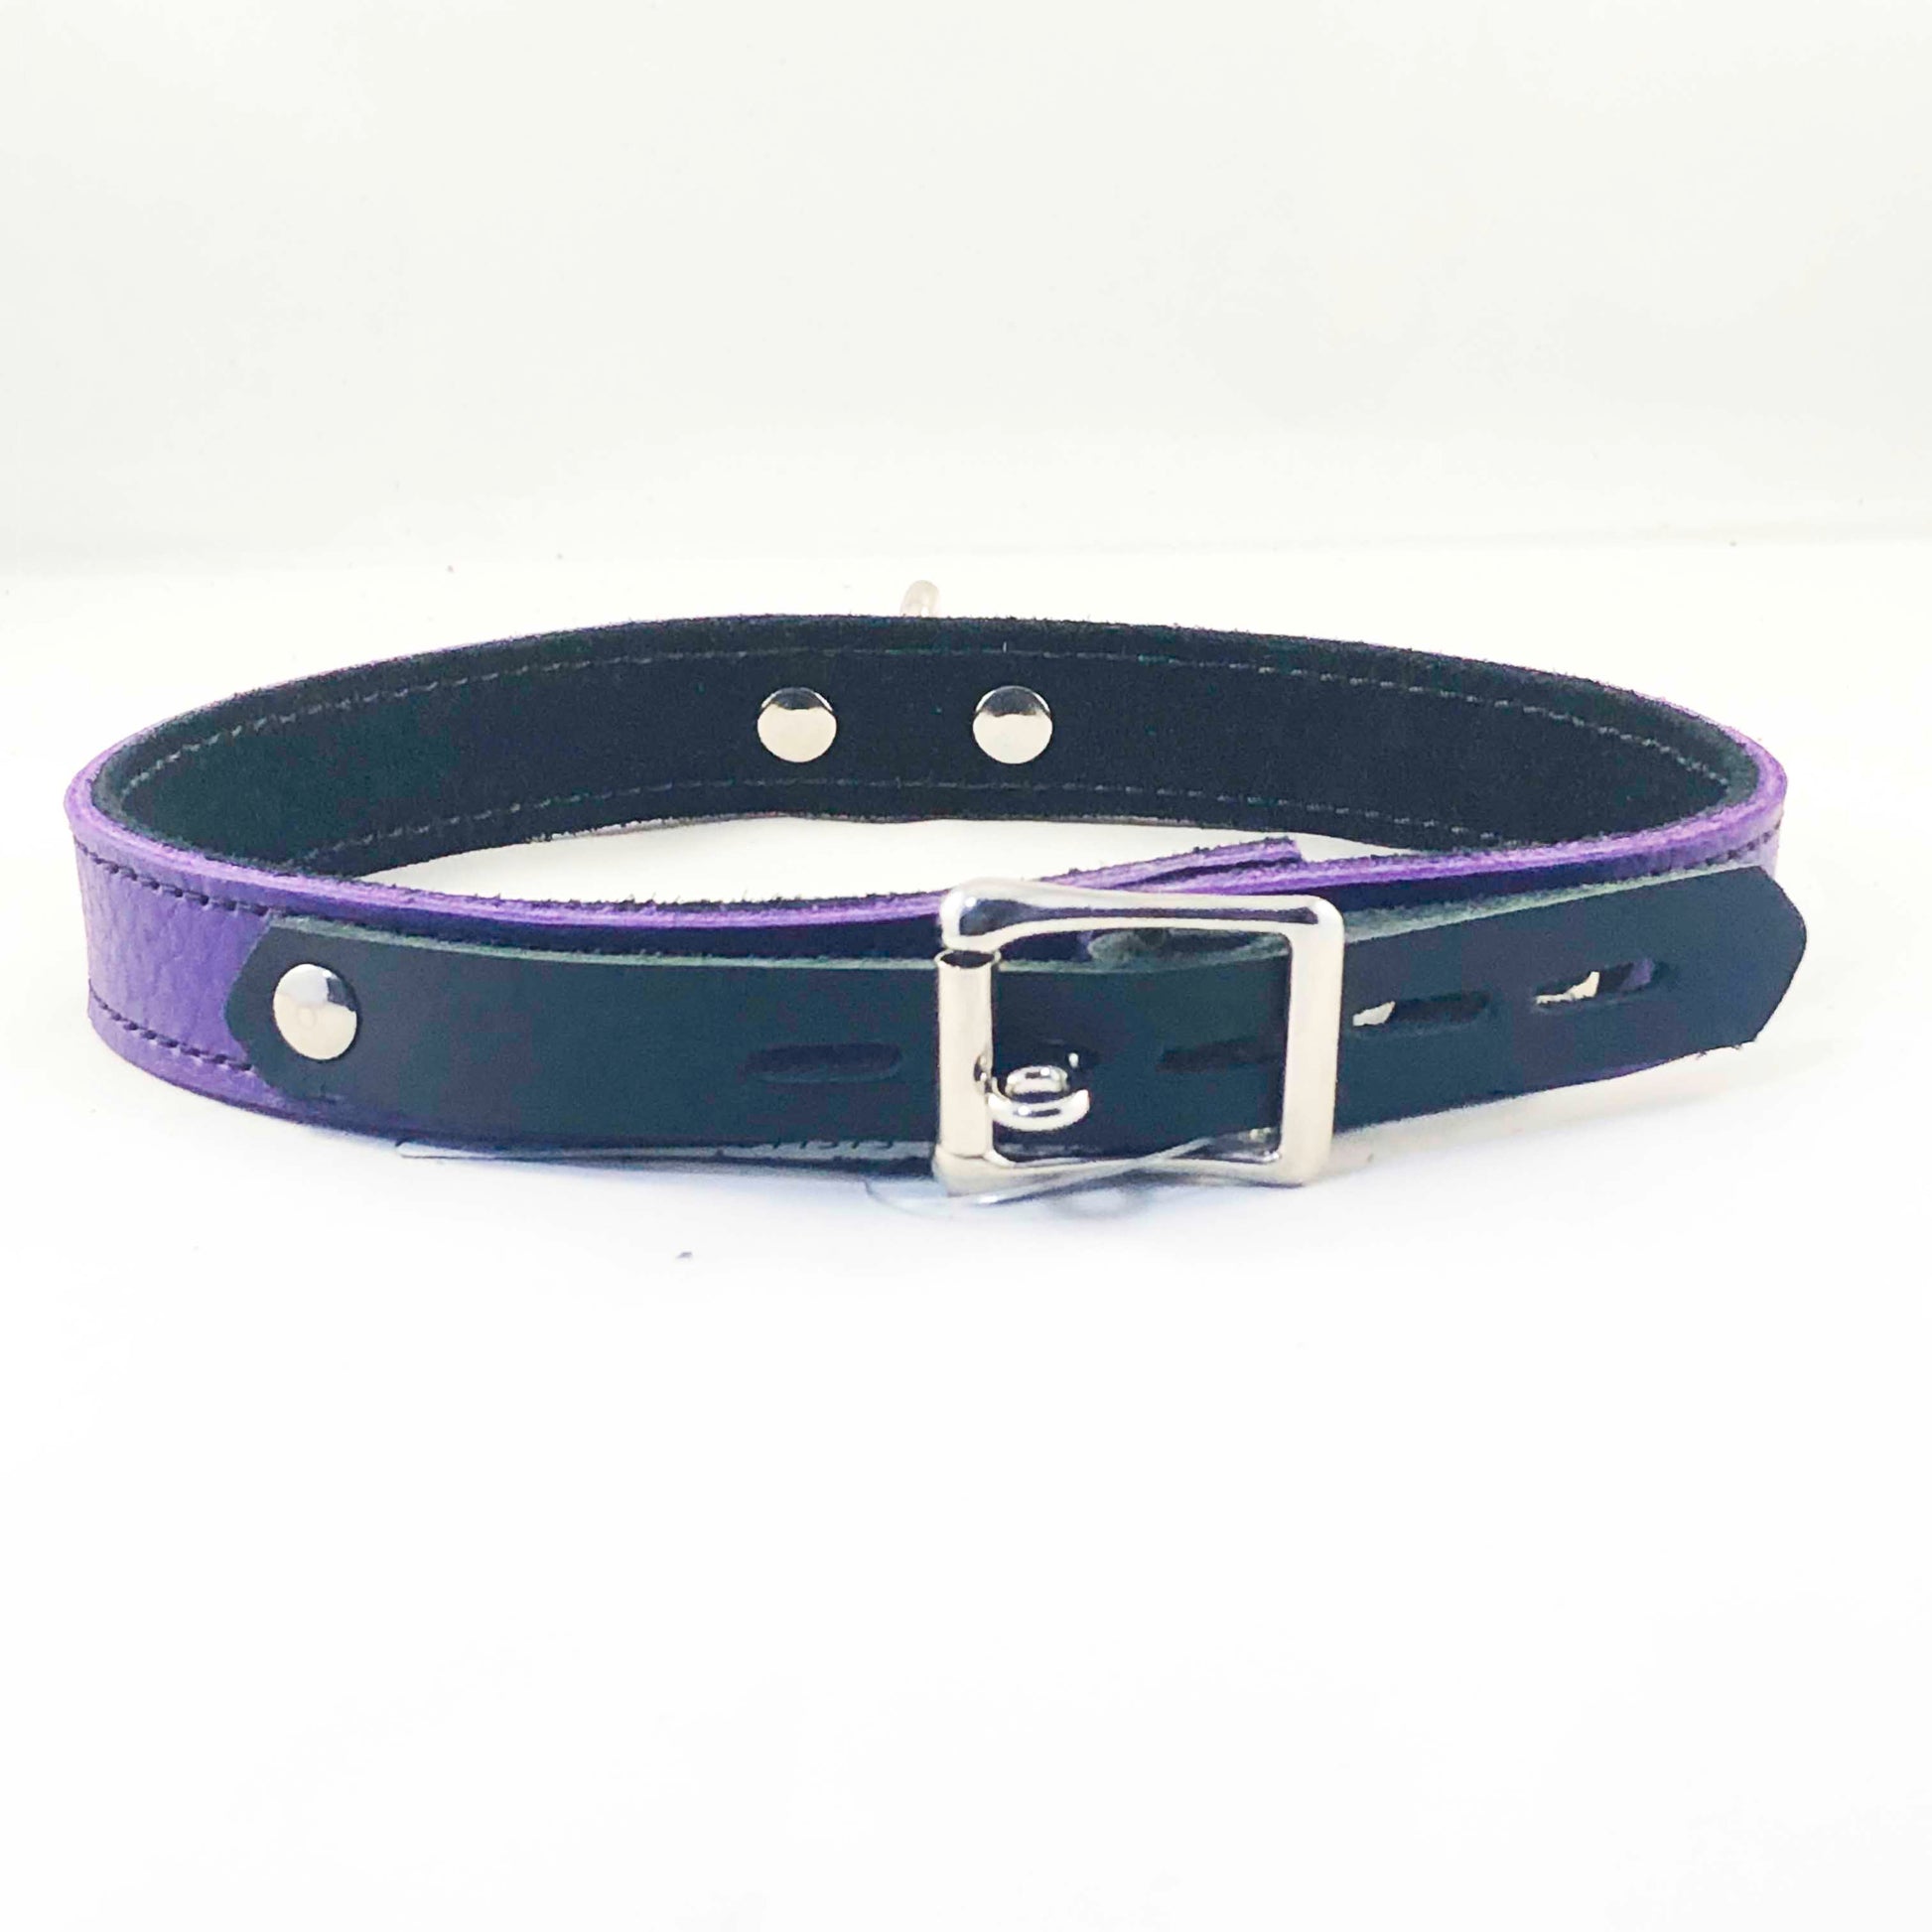 The rear view of the purple Basic Single Ring Collar.